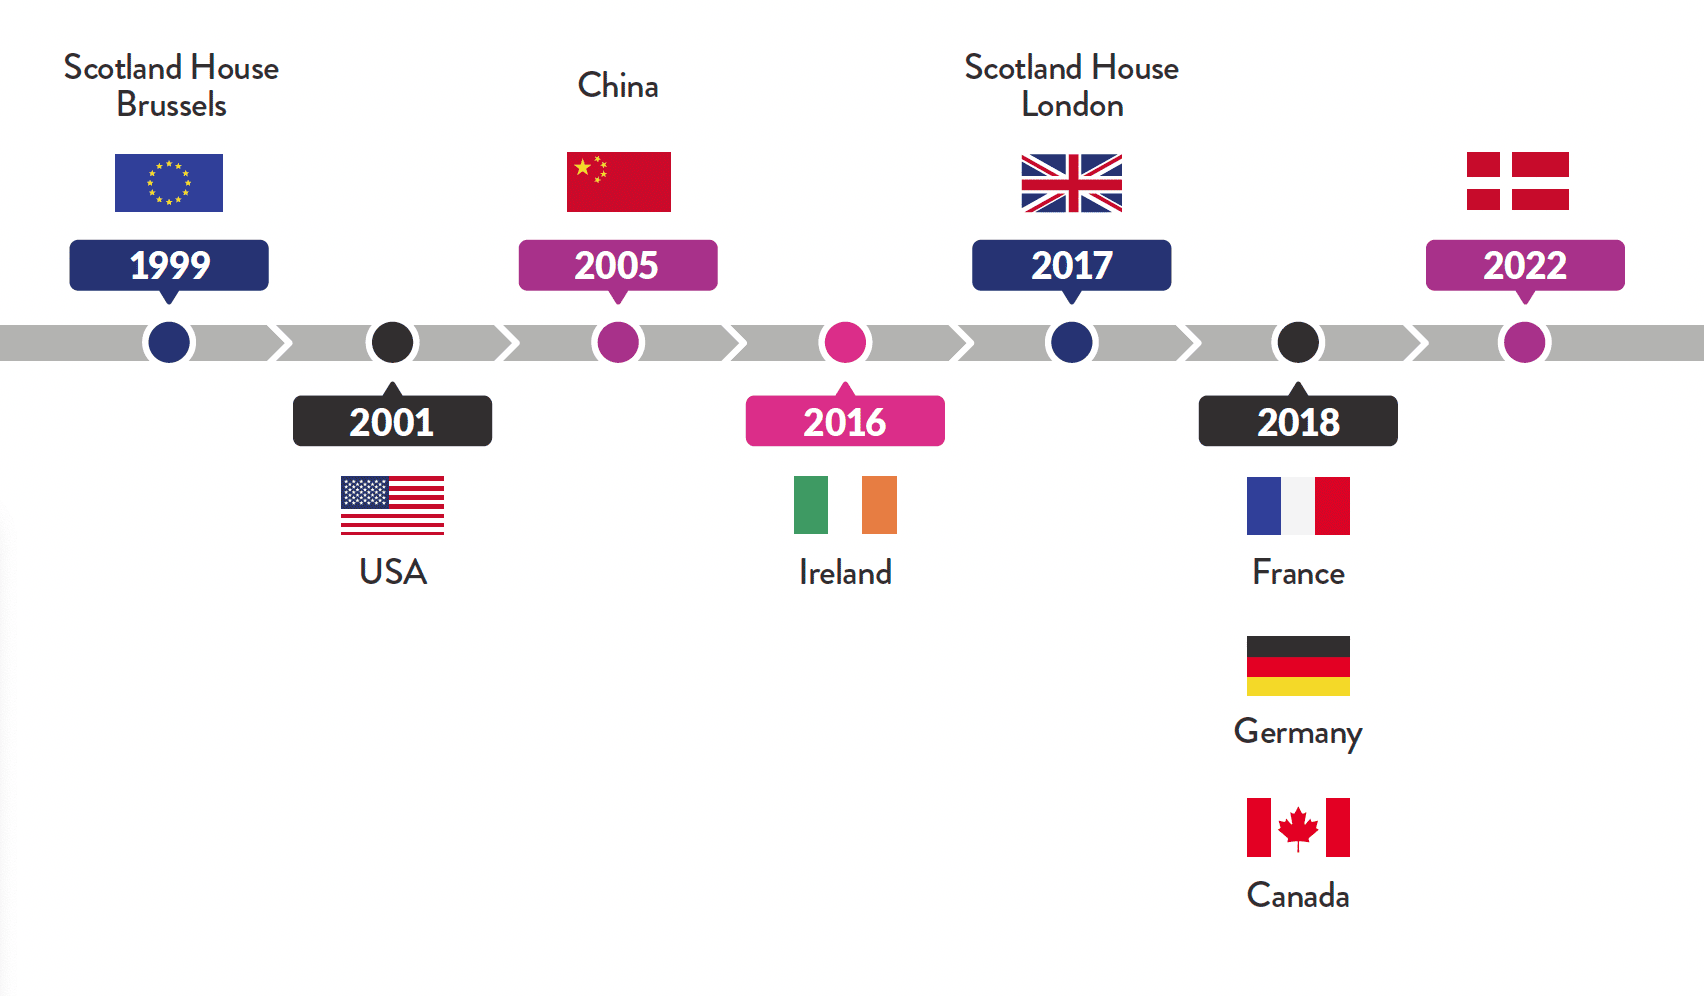 a timeline showing the year each office was opened